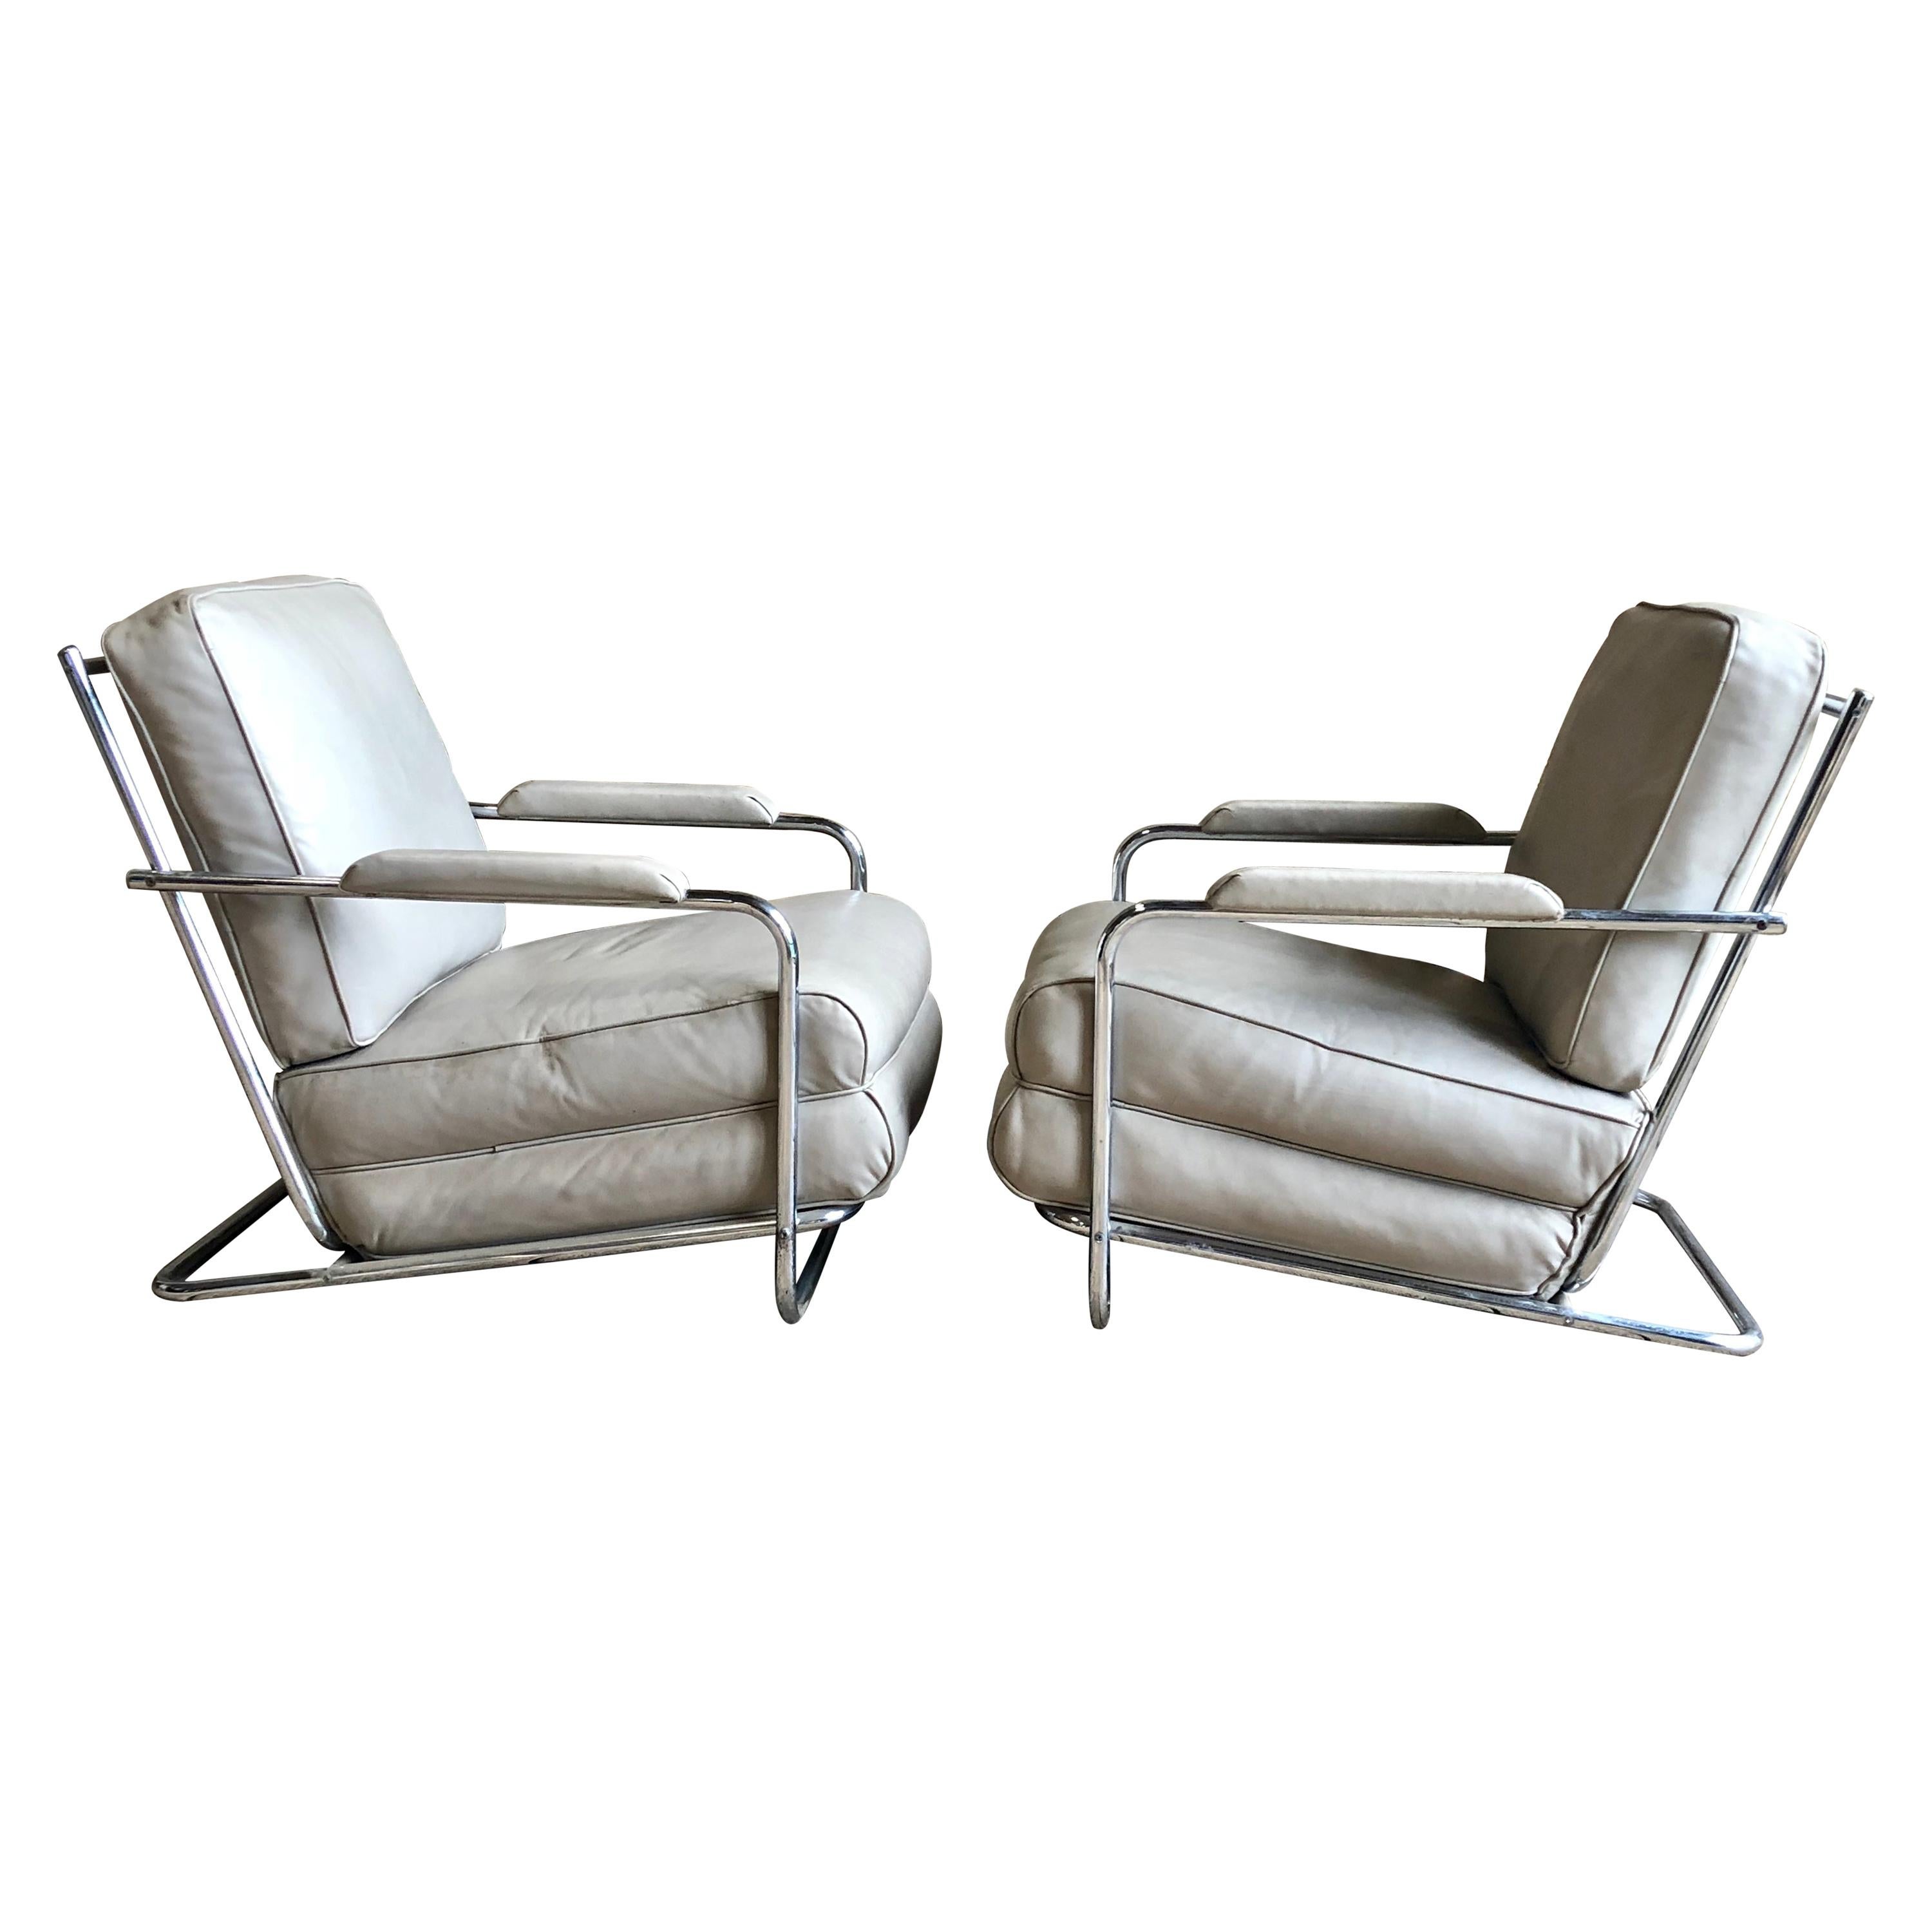 Pair of Gilbert Rohde Lounge Chairs In Chrome and Leather